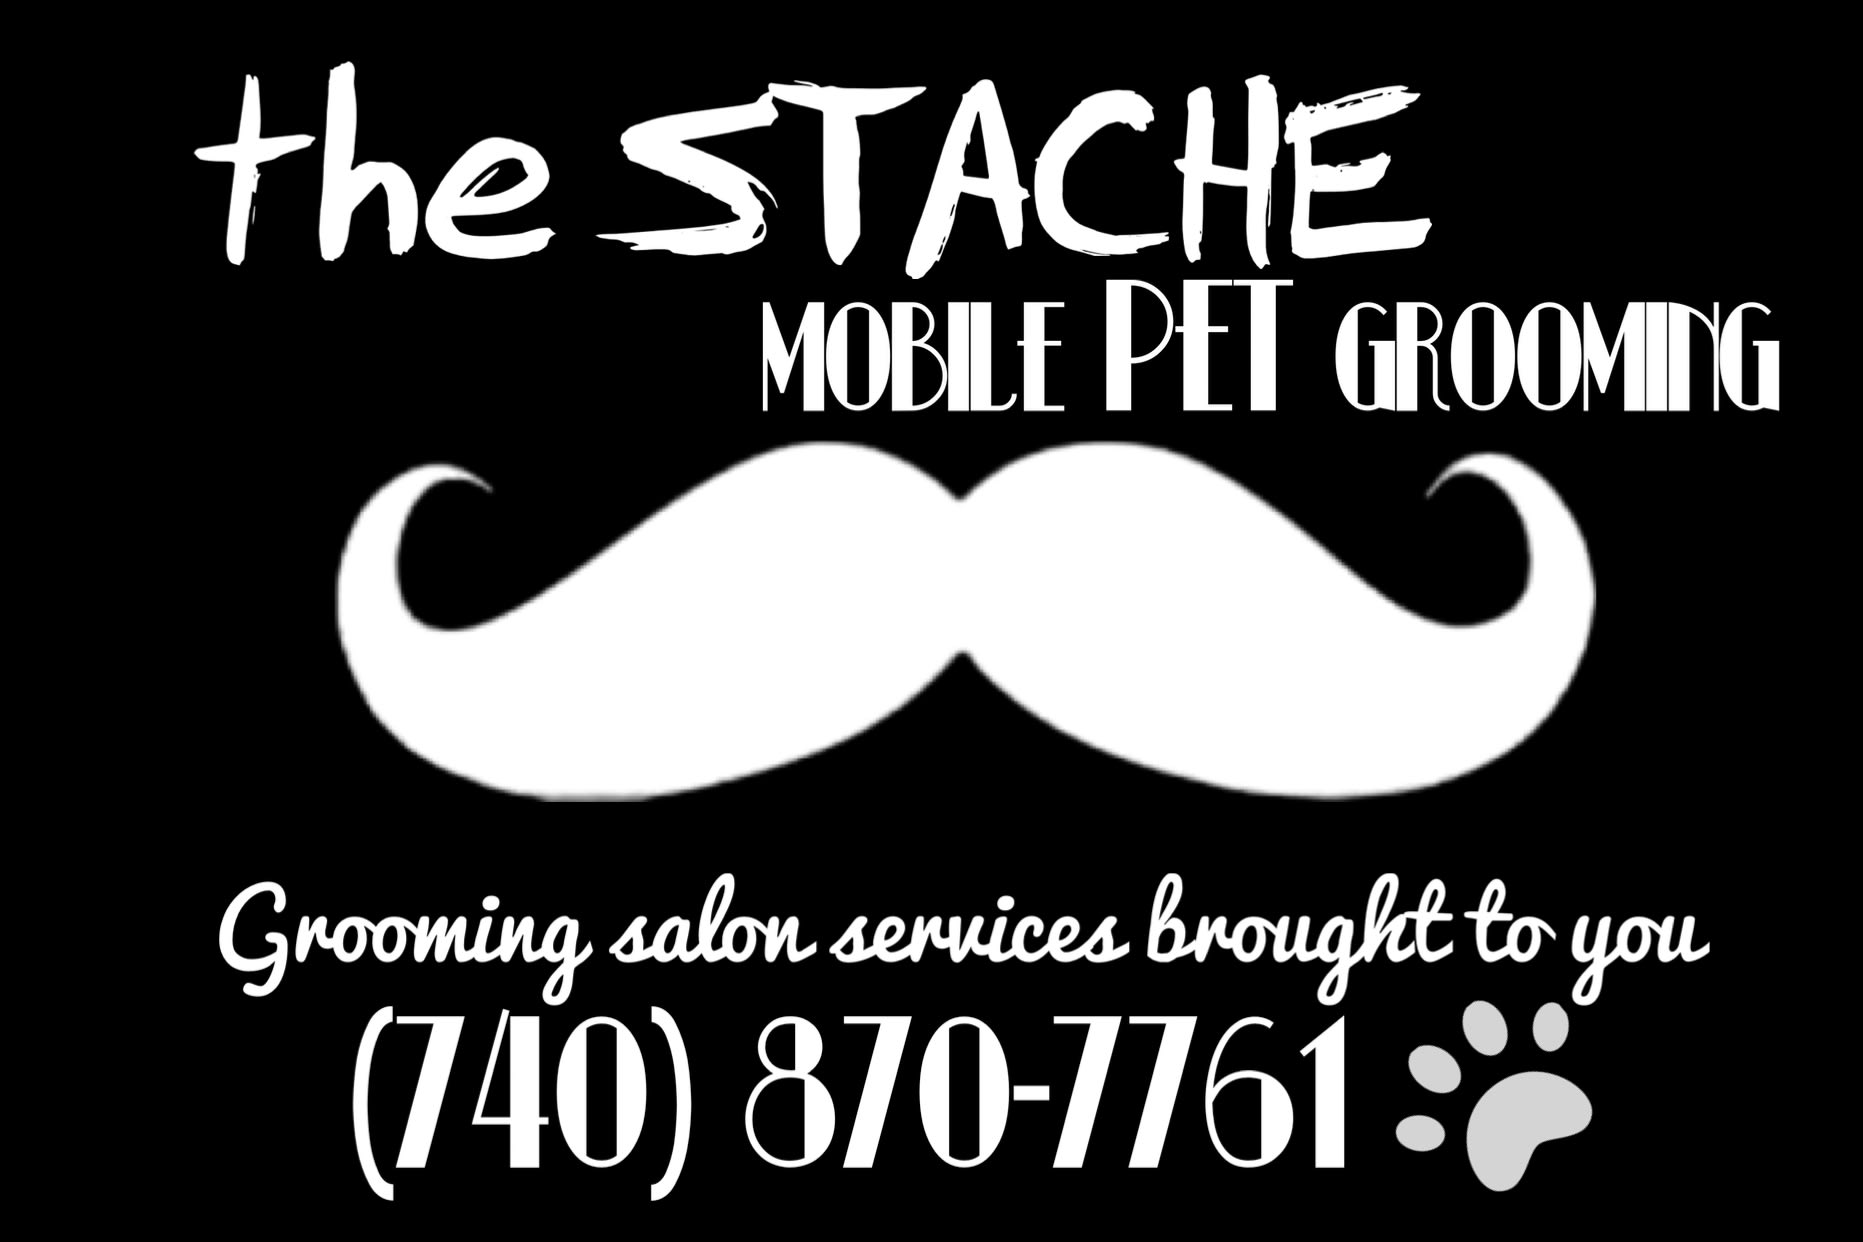 The Stache In home pet Grooming